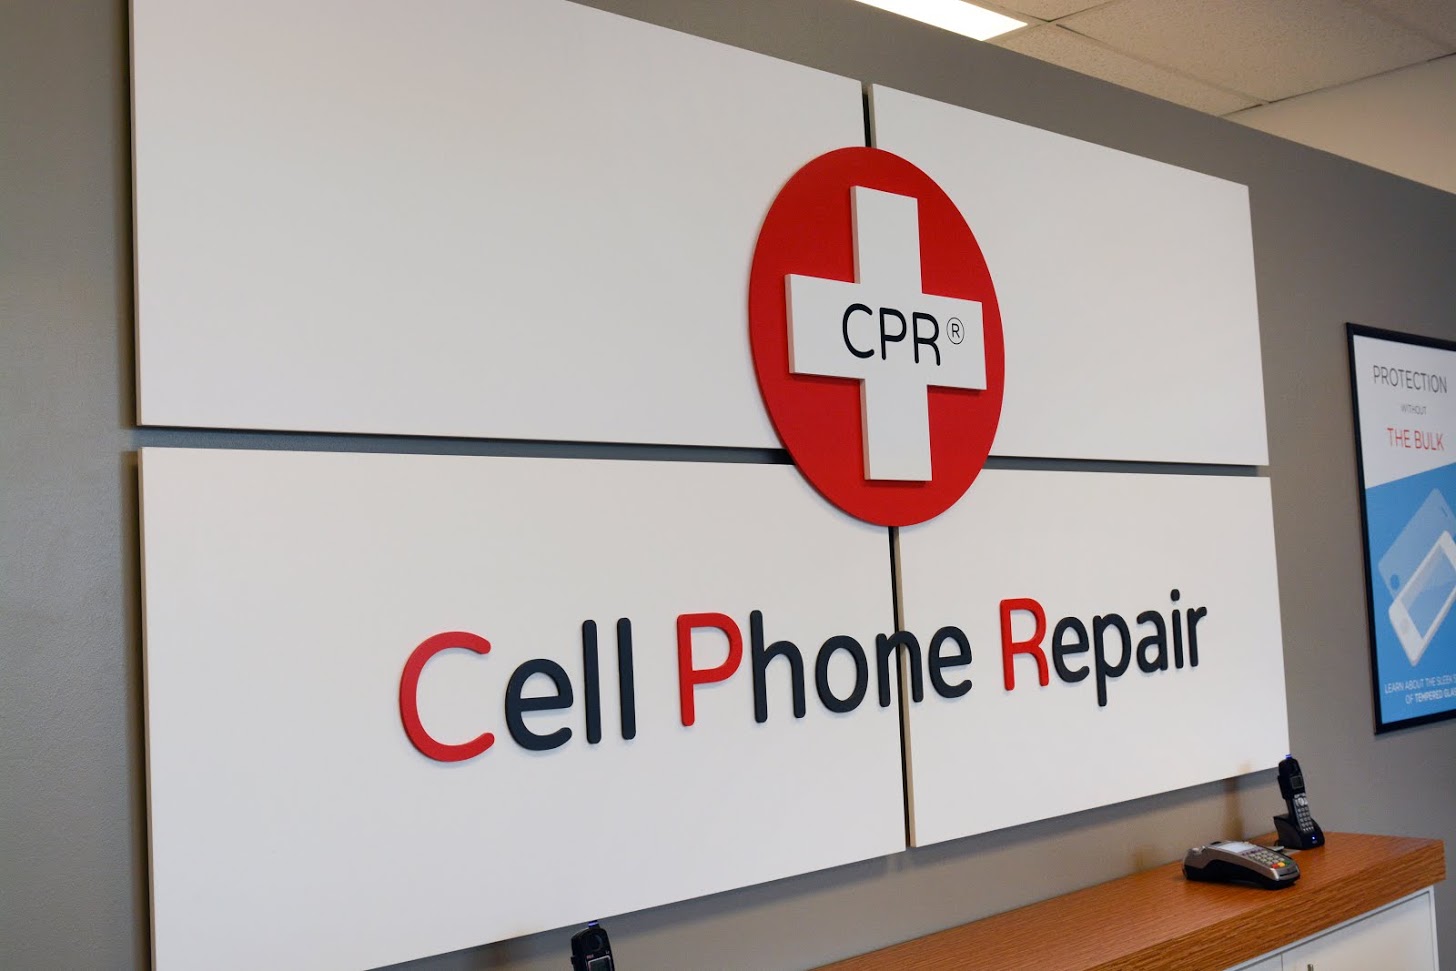 CPR Cell Phone Repair, Monday, March 9, 2020, Press release picture